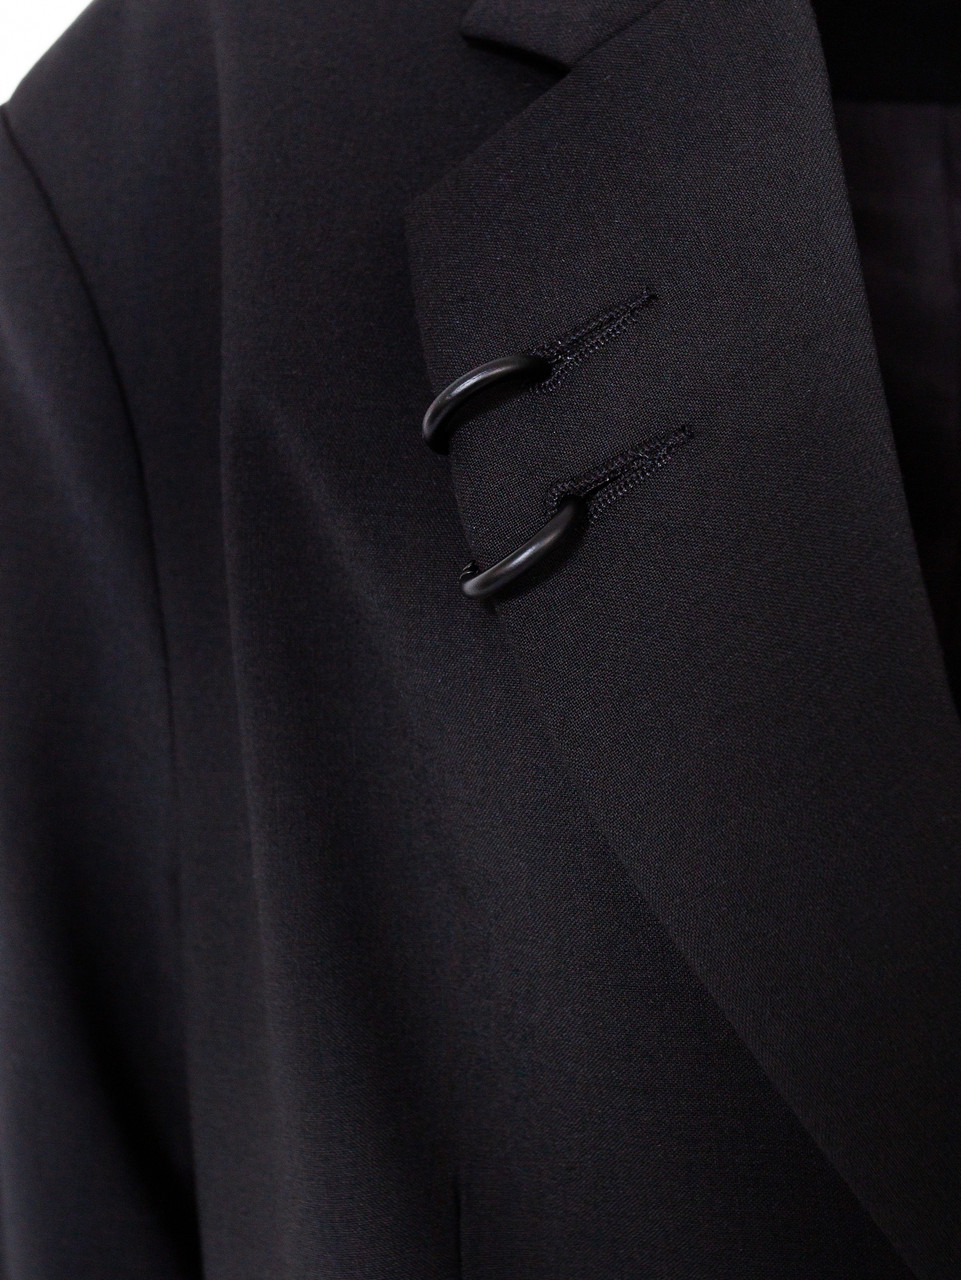 Black Wool Blend Tailored Semi-fitted Single Breasted Blazer | TATSUO ...